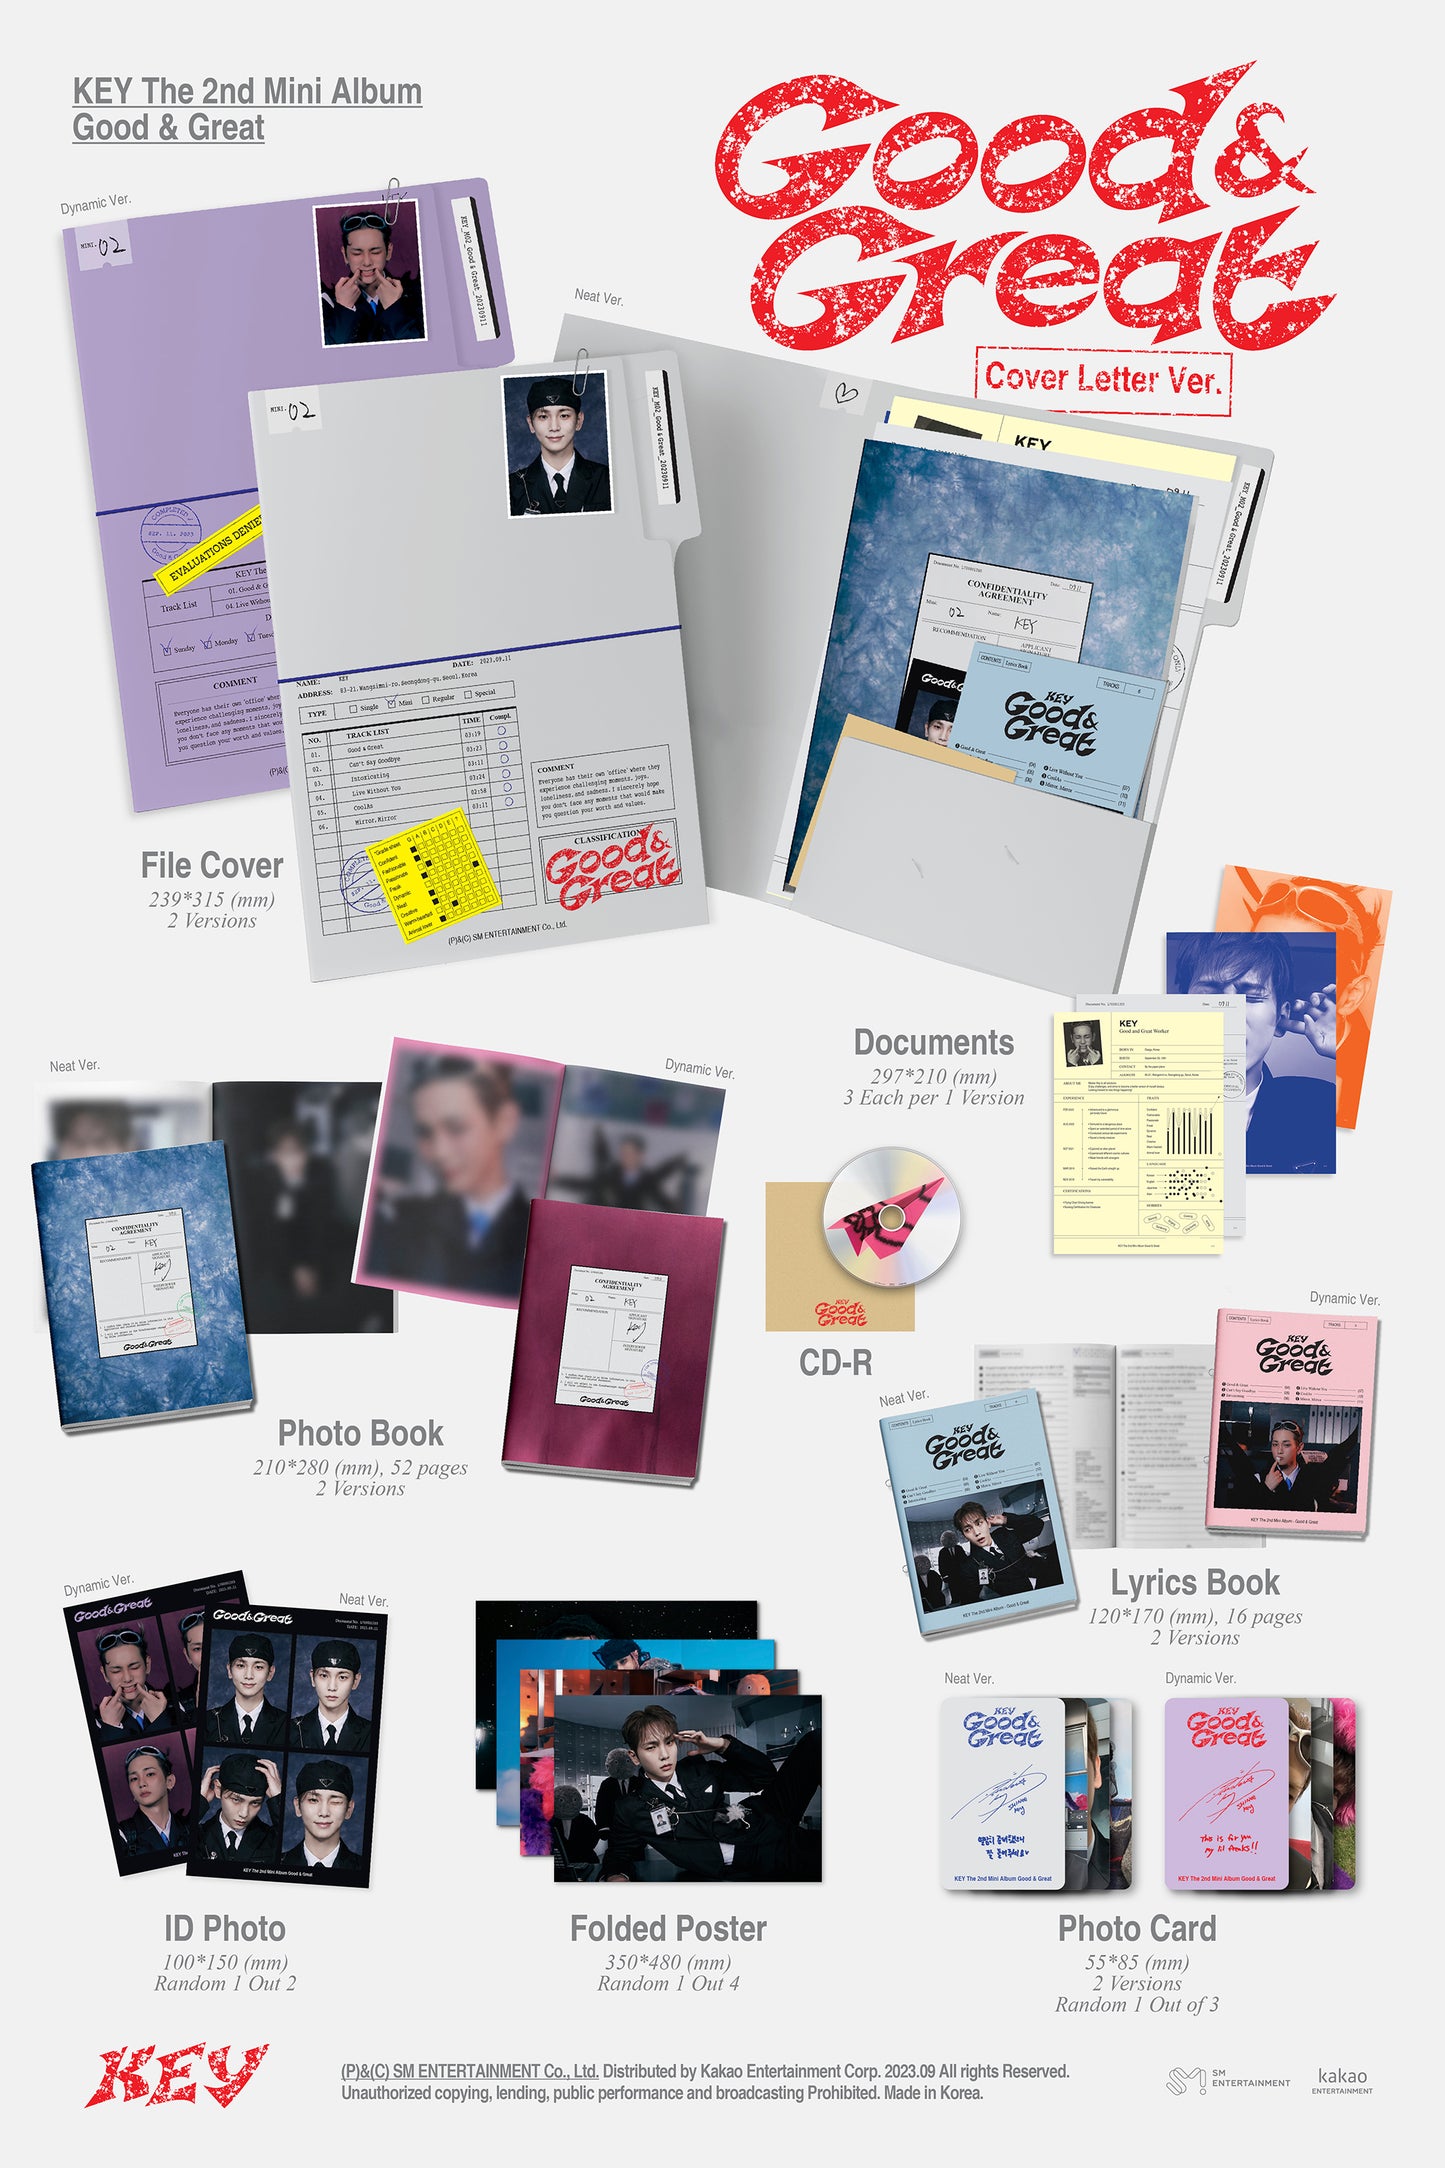    jstore_online_key_good_and_great_album_cover_letter_version